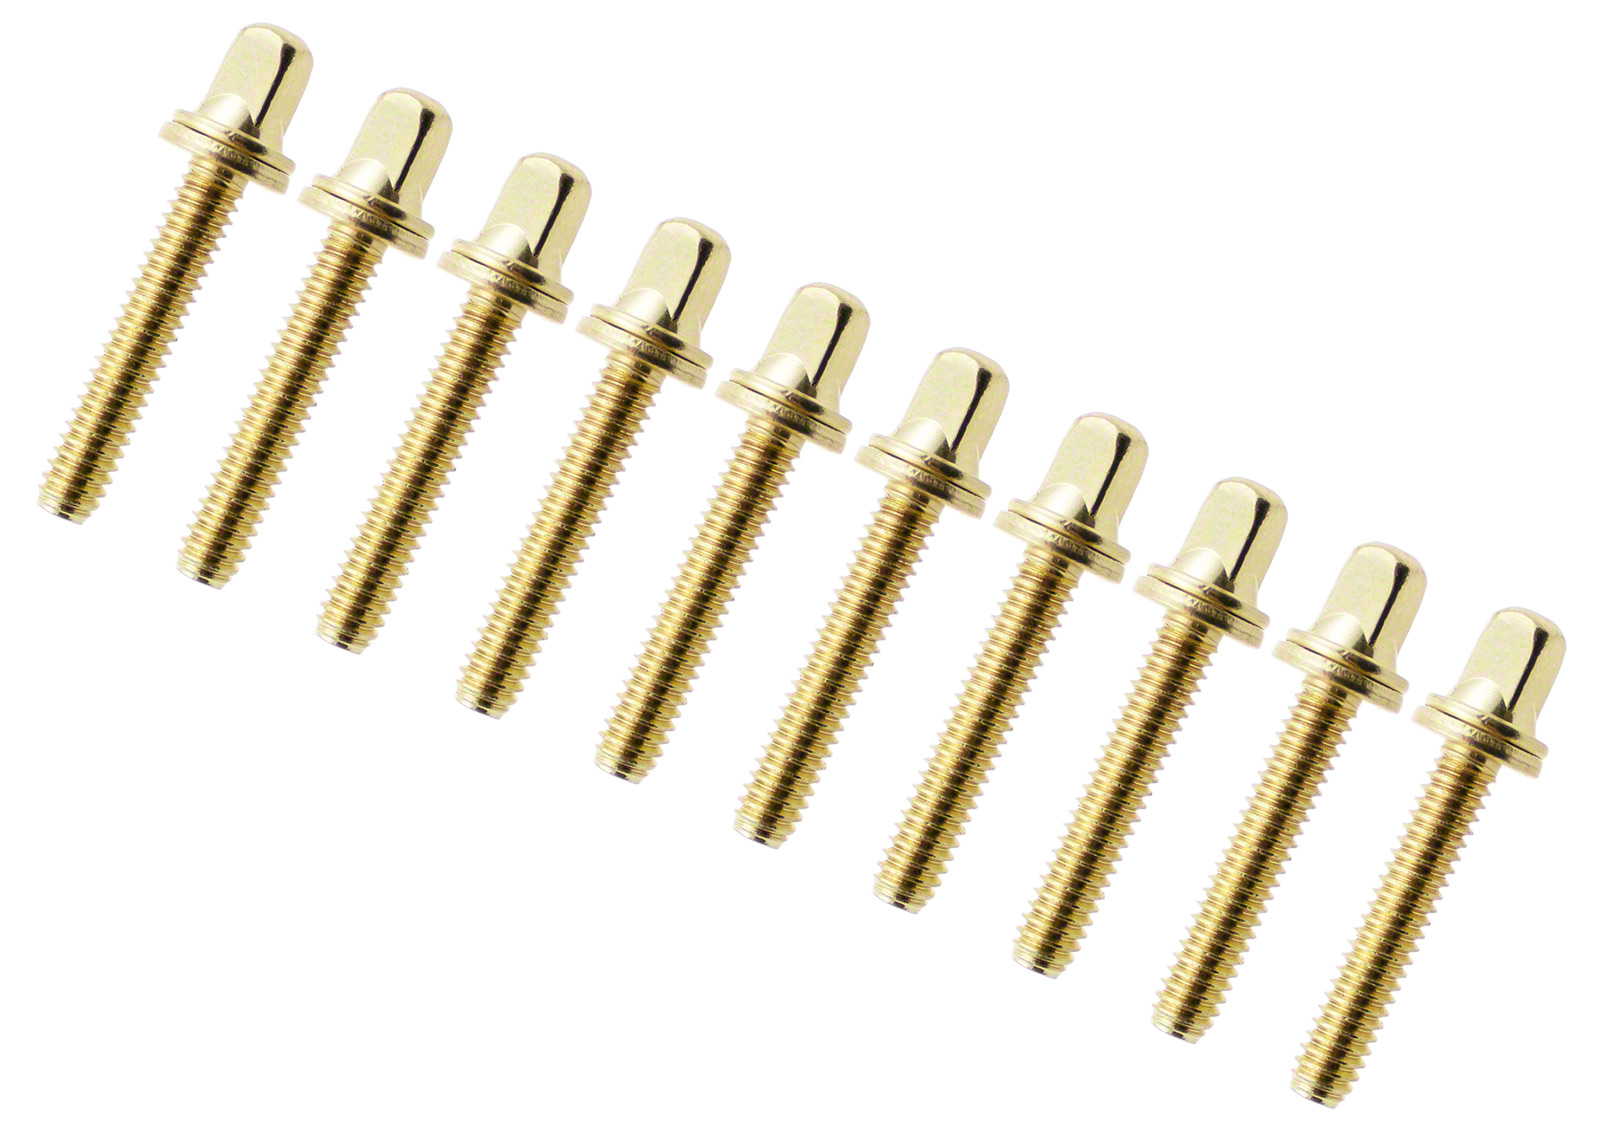 SPAREDRUM TRC-30W-BR - 30MM TENSION ROD BRASS WITH WASHER - 7/32